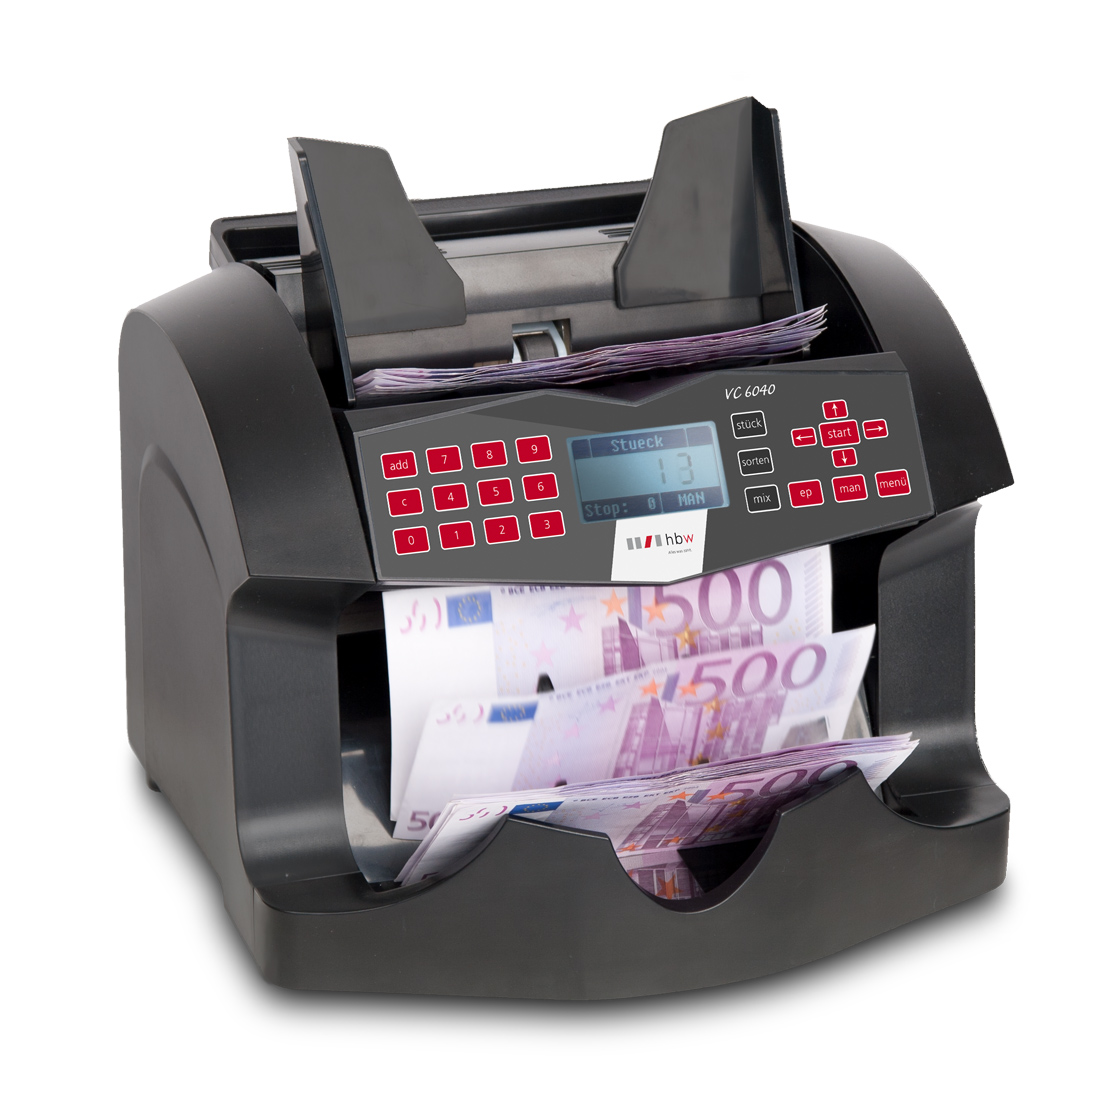 Banknote counters hbw VC 6040 S